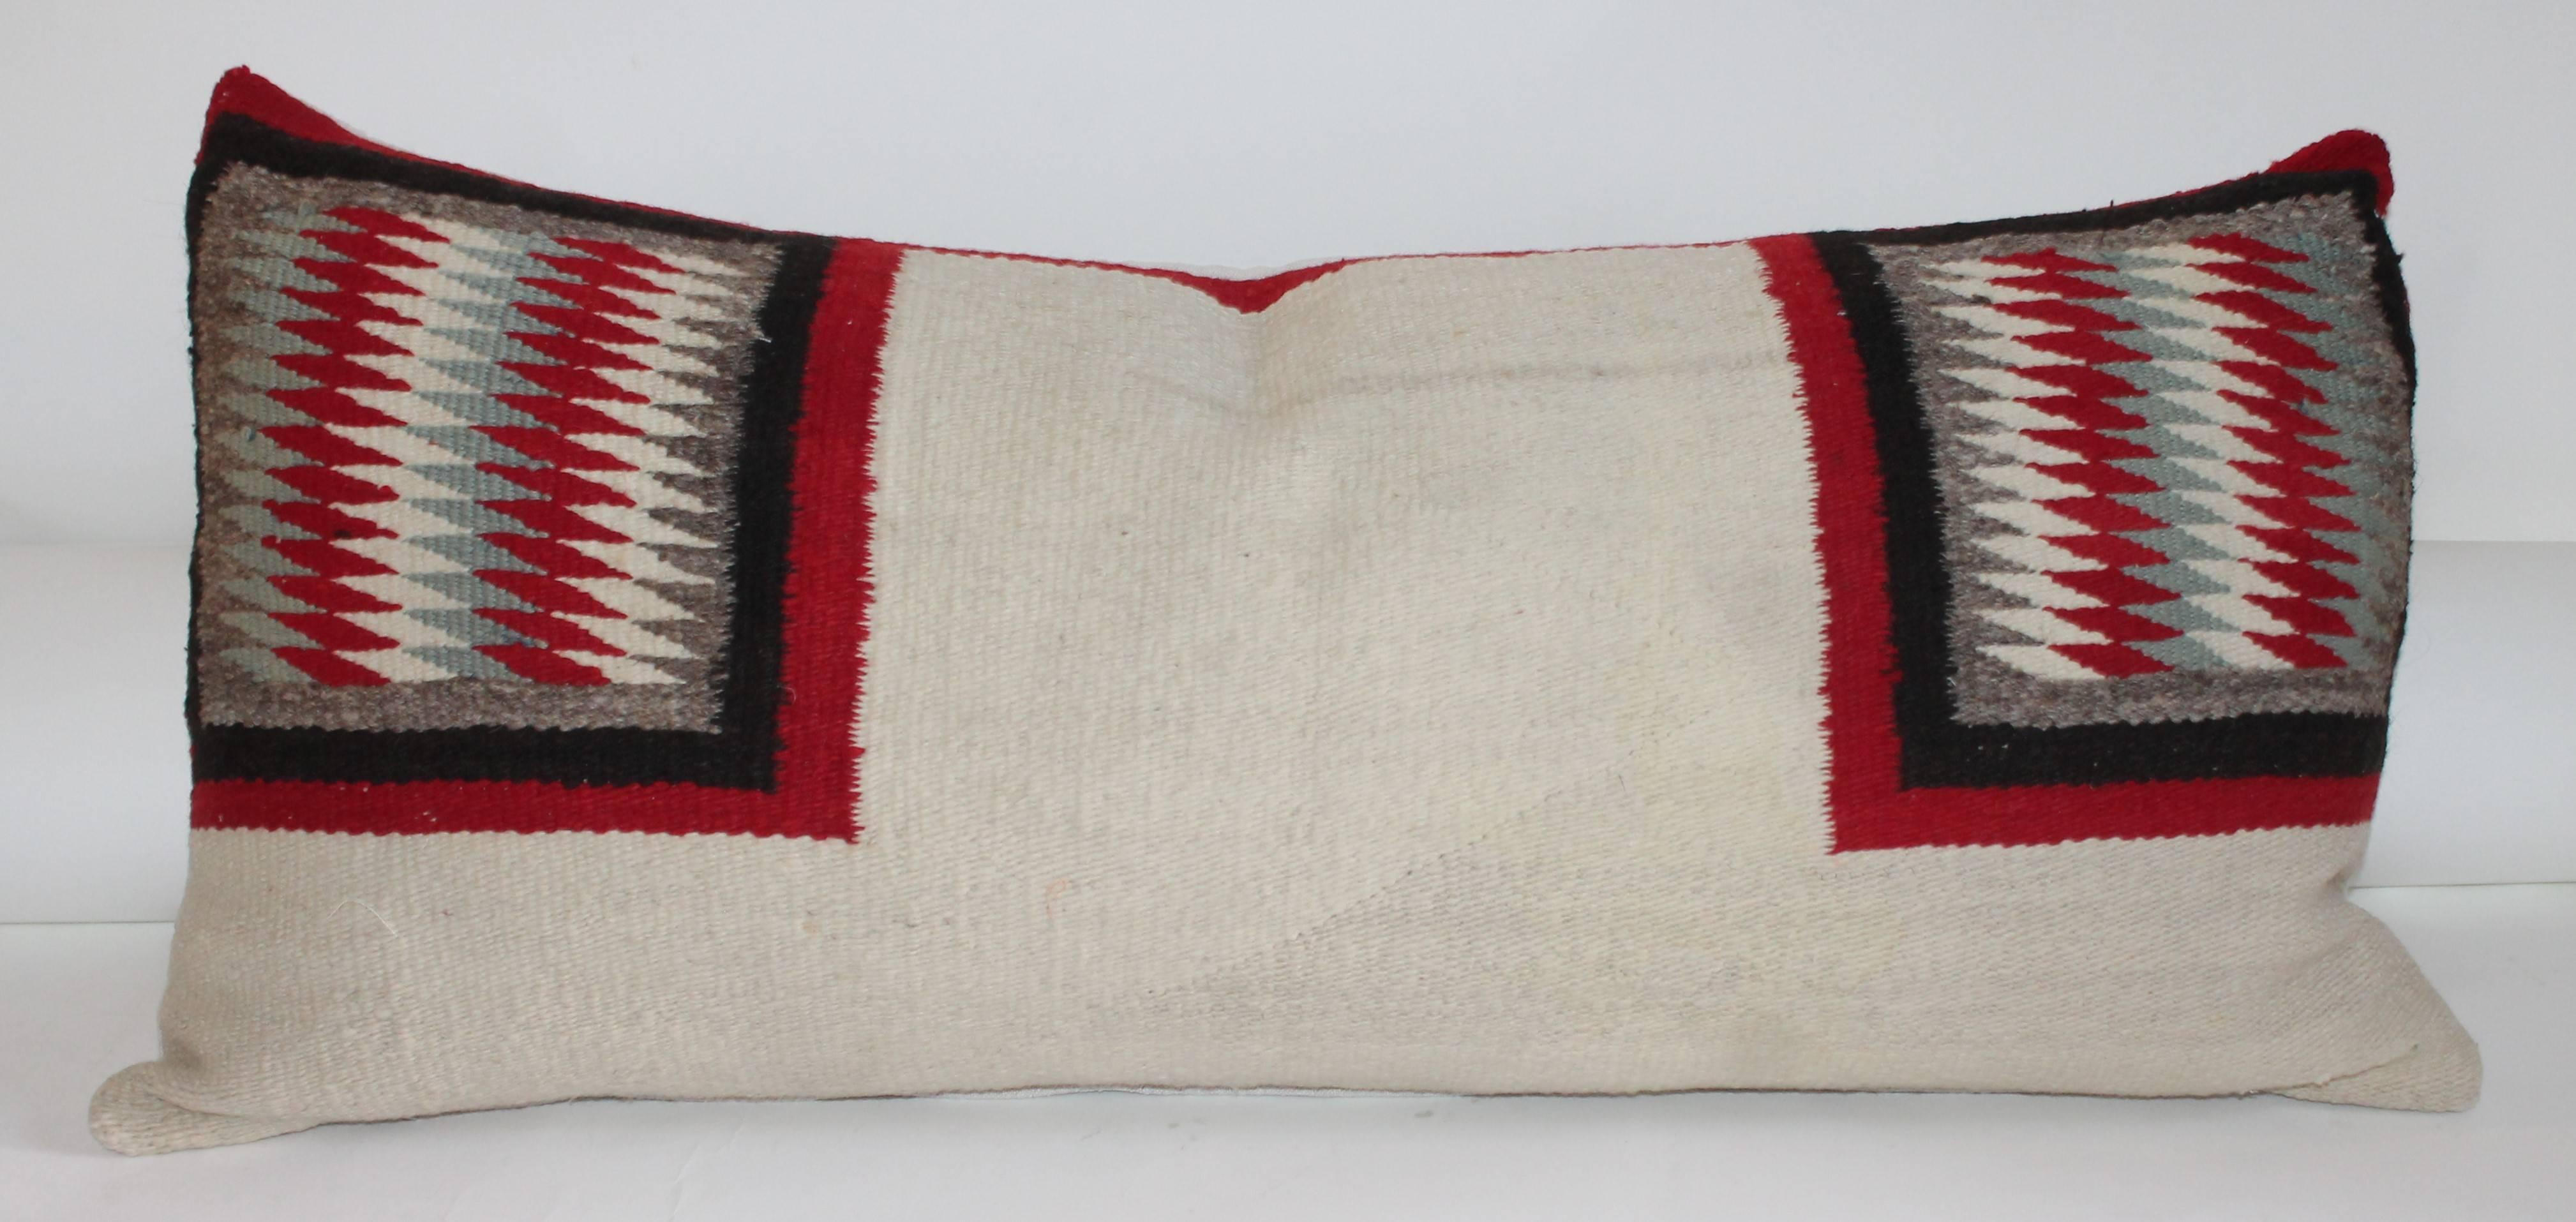 This saddle blanket weaving bolster pillow is in great as found condition with geometric squares on each end. The condition is in very good. The backing is in homespun linen.